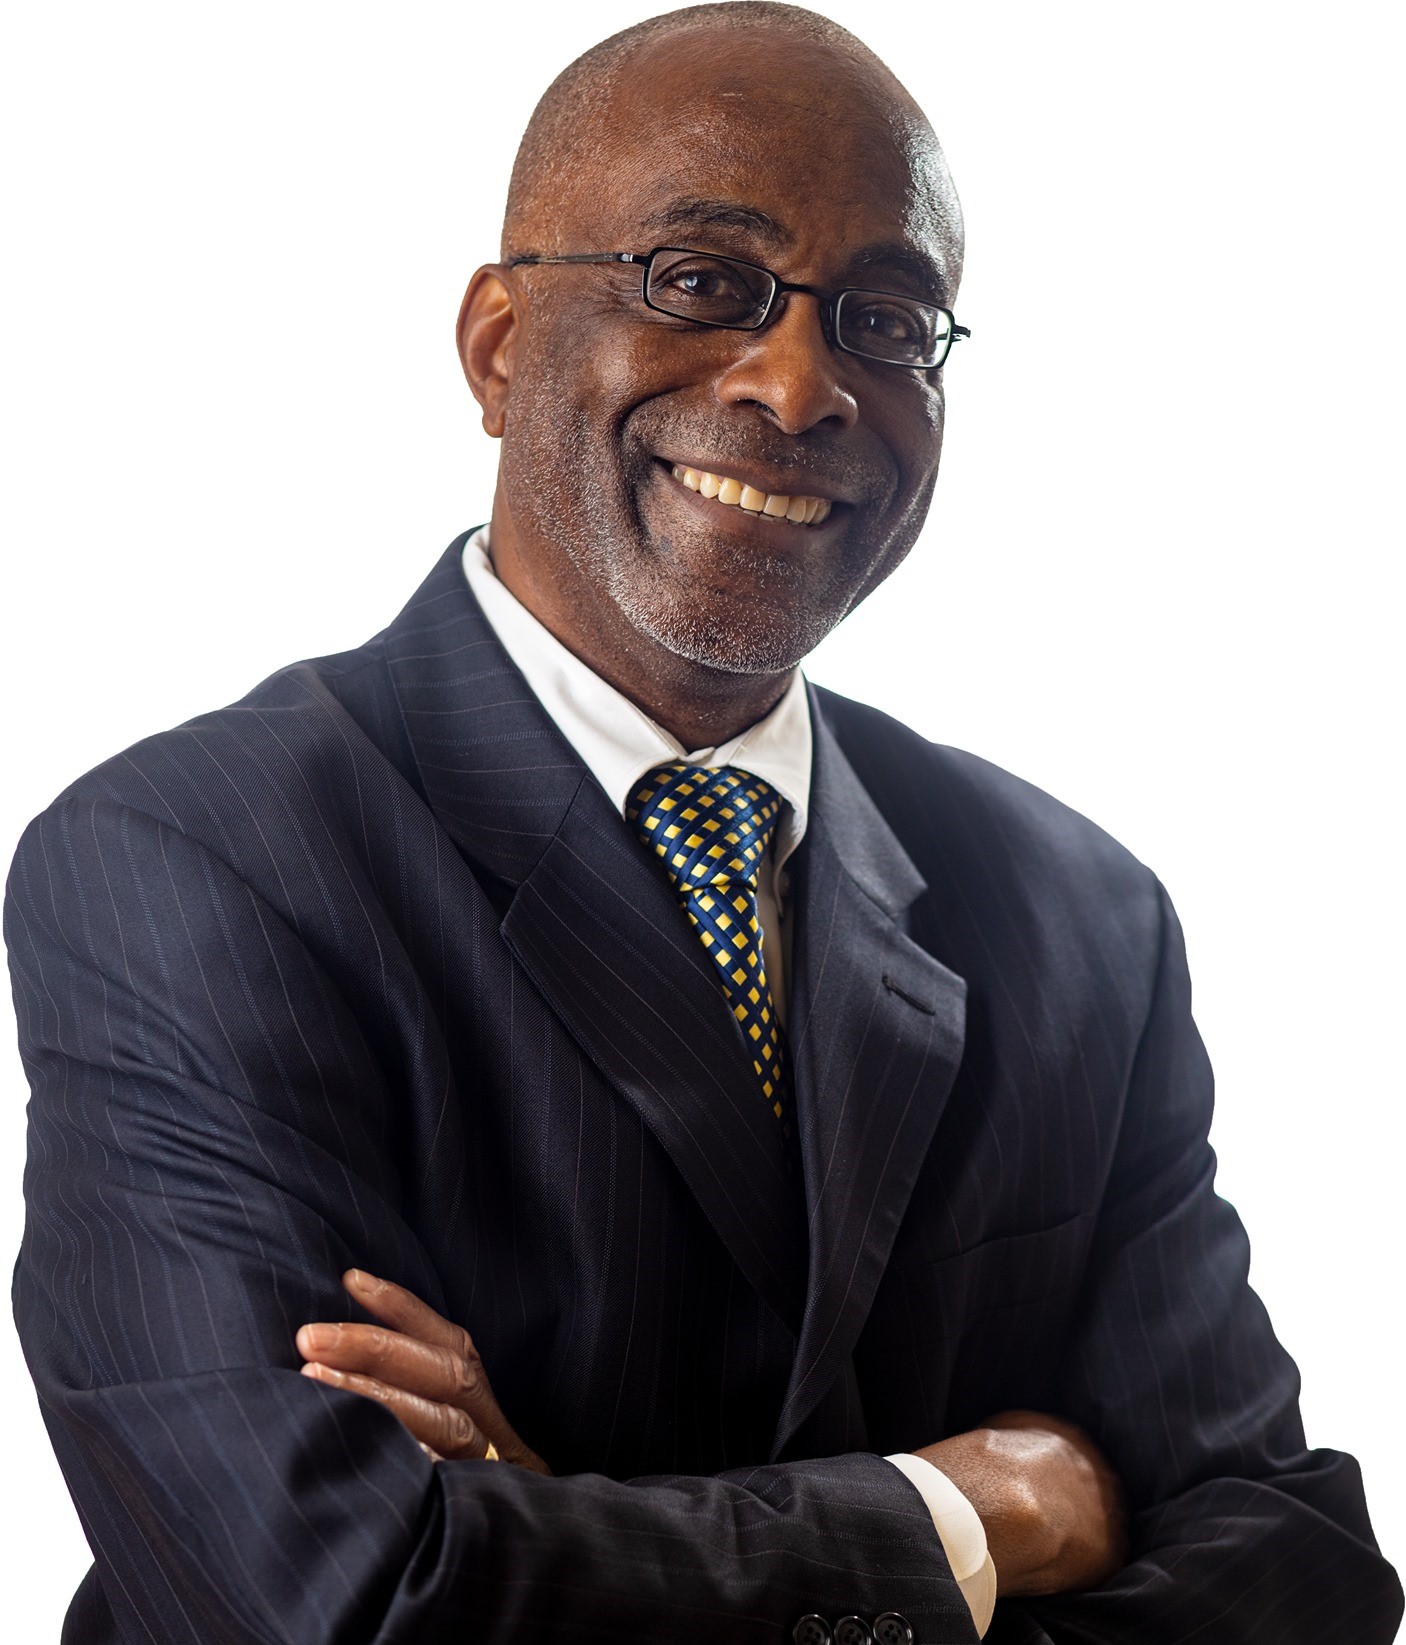 Image of Joe D Feaster, Jr., a Black attorney wearing a suit and tie, with glasses, with minimal facial hair